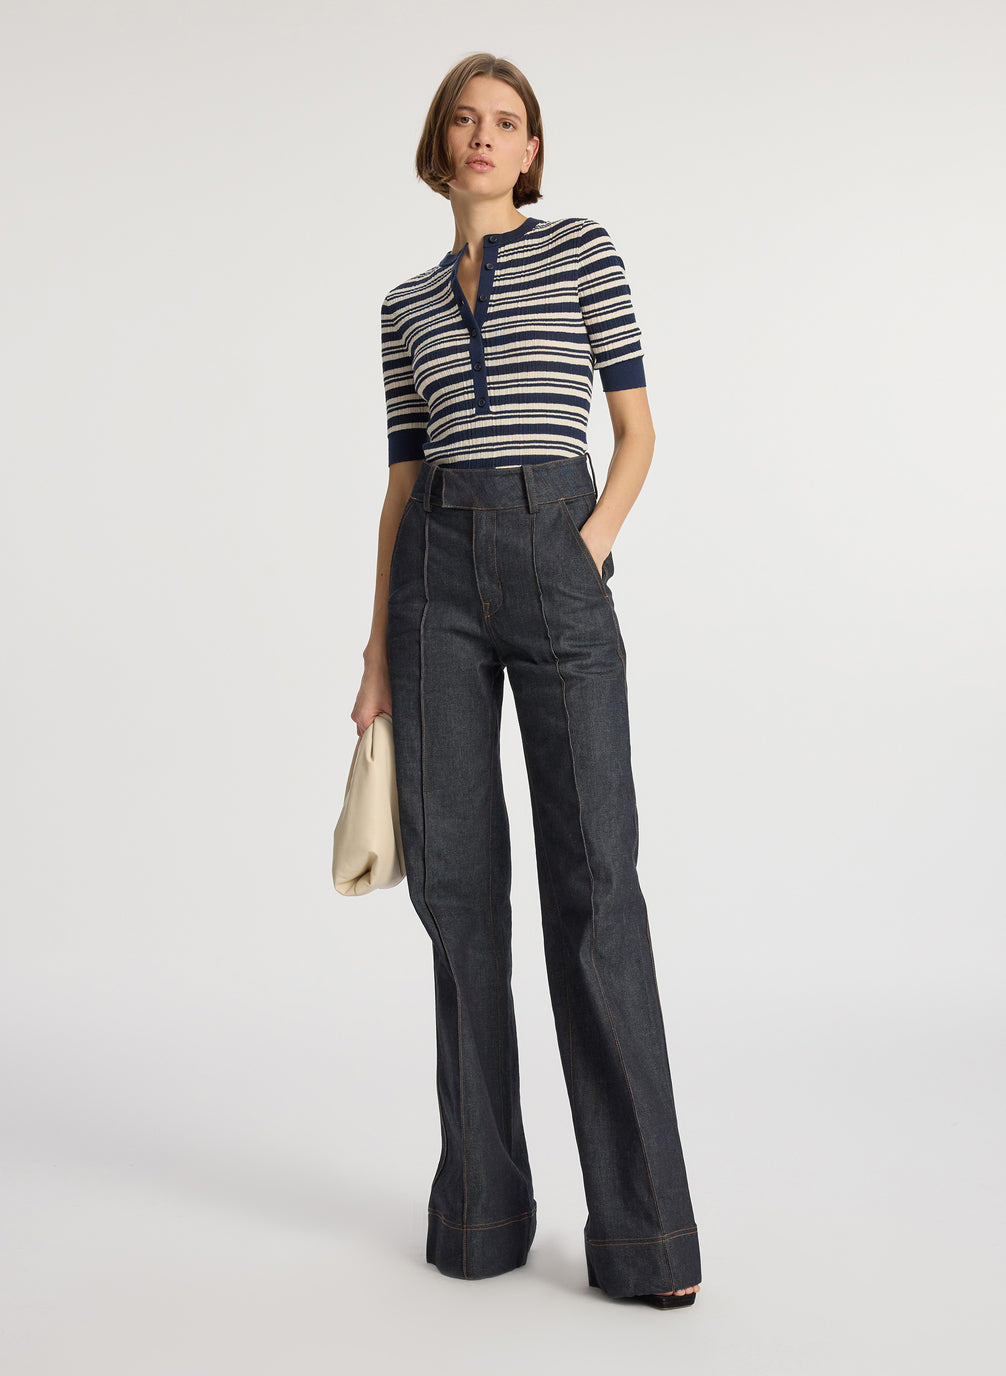 A.L.C. - Fisher Top - Navy/White